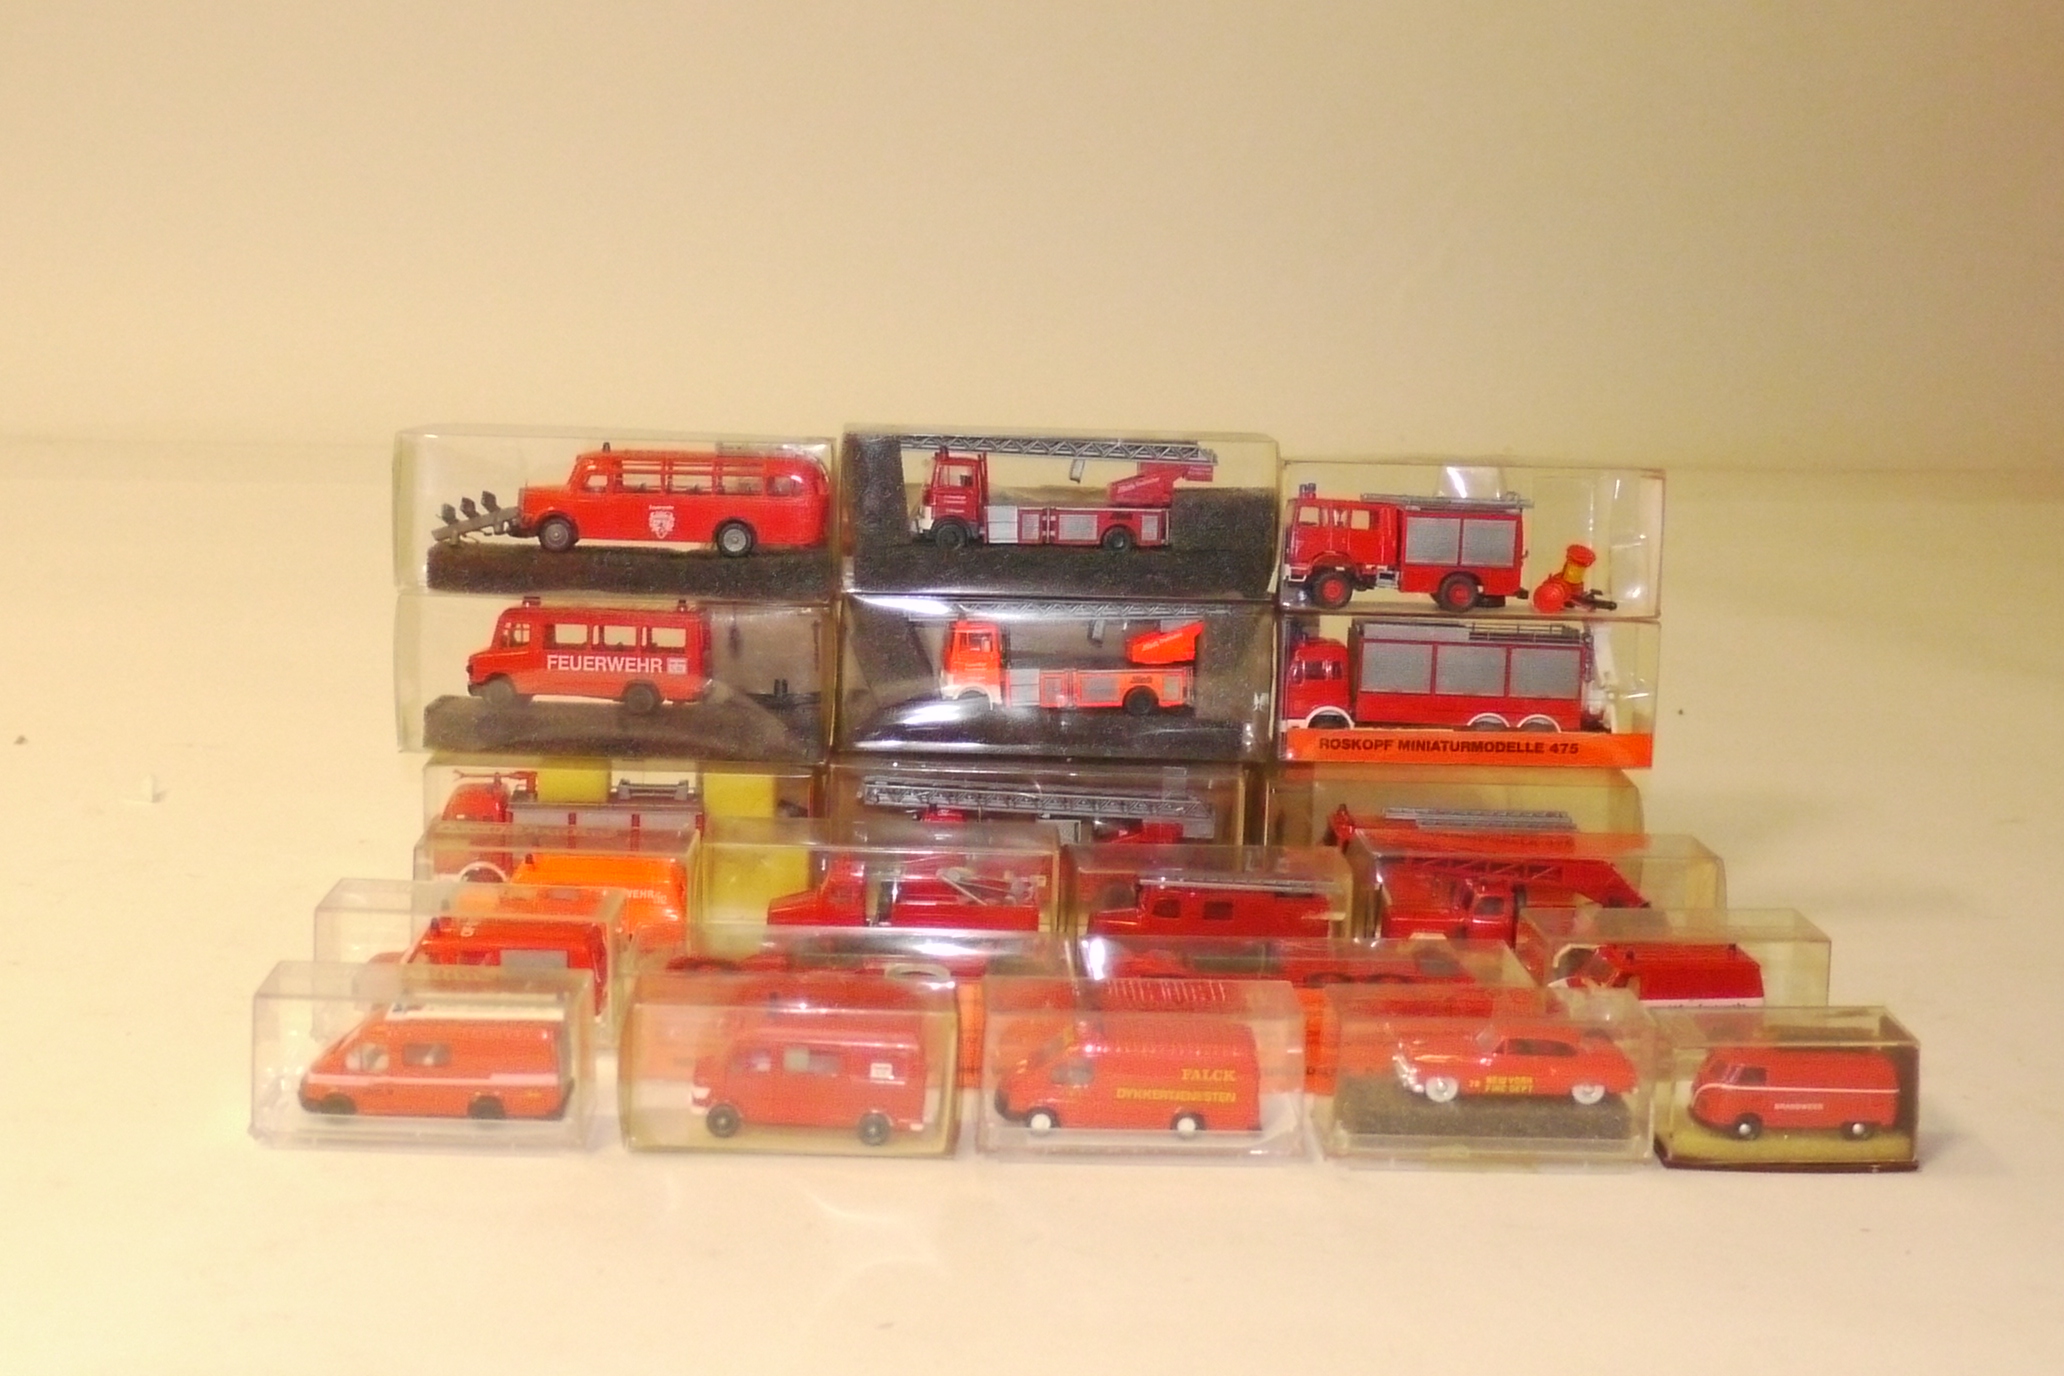 Roskopf Wiking and others plastic Scale Model Vehicles, Collection of international fire service